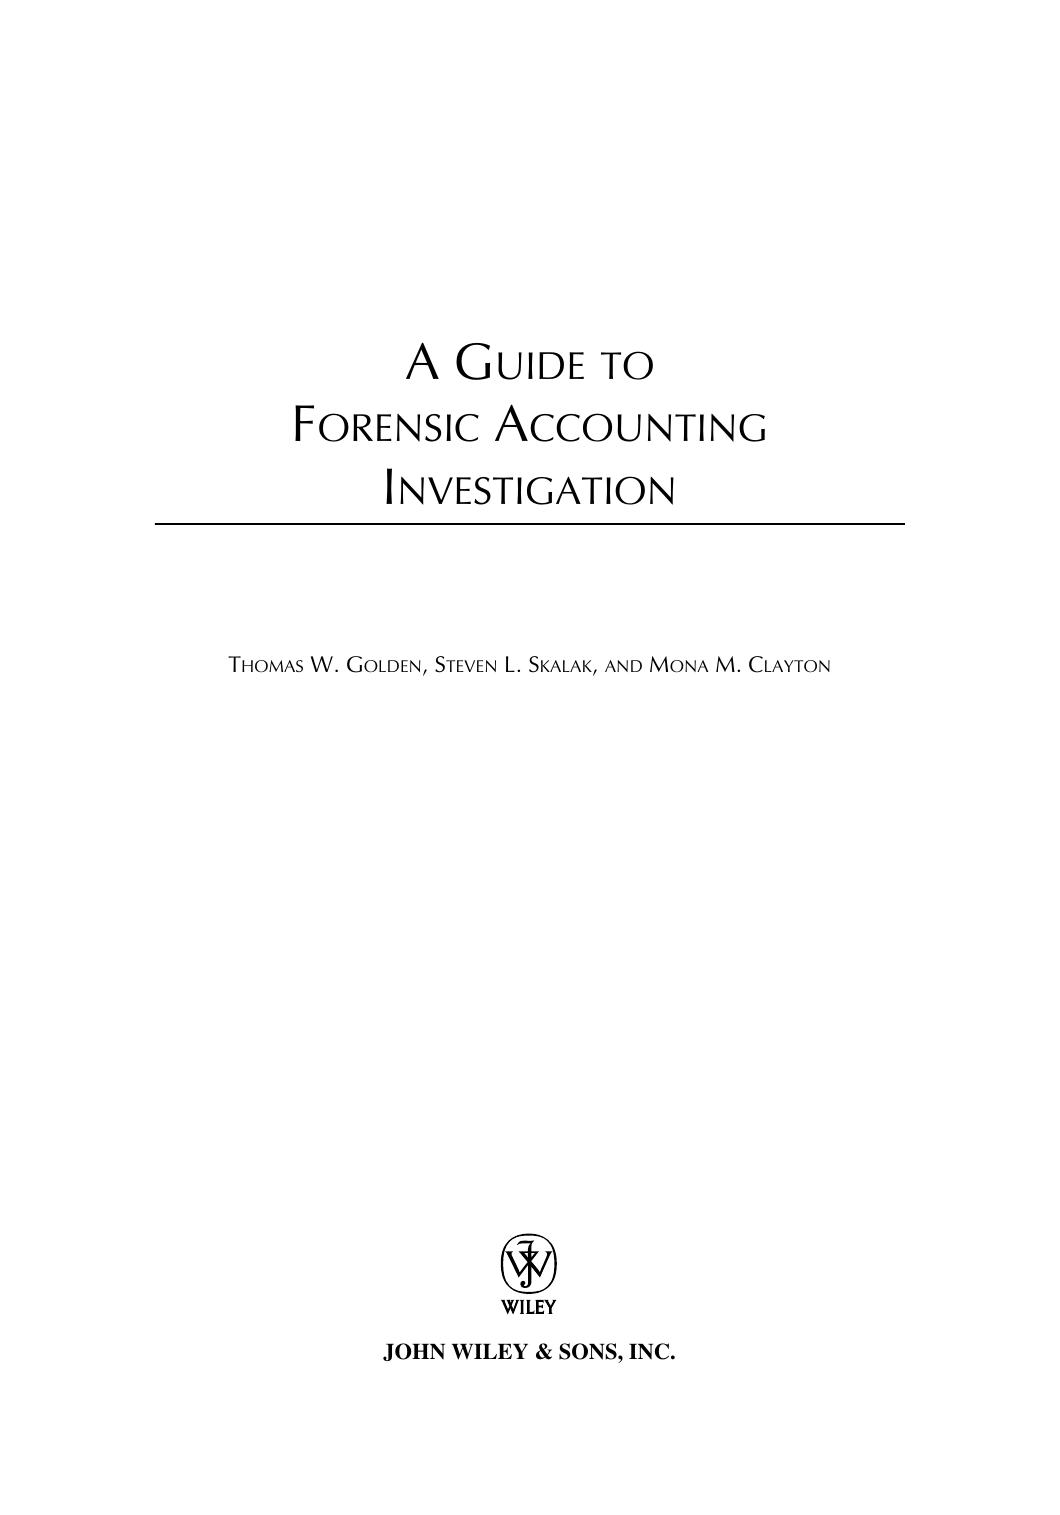 Wiley A Guide to Forensic Accounting Investigation